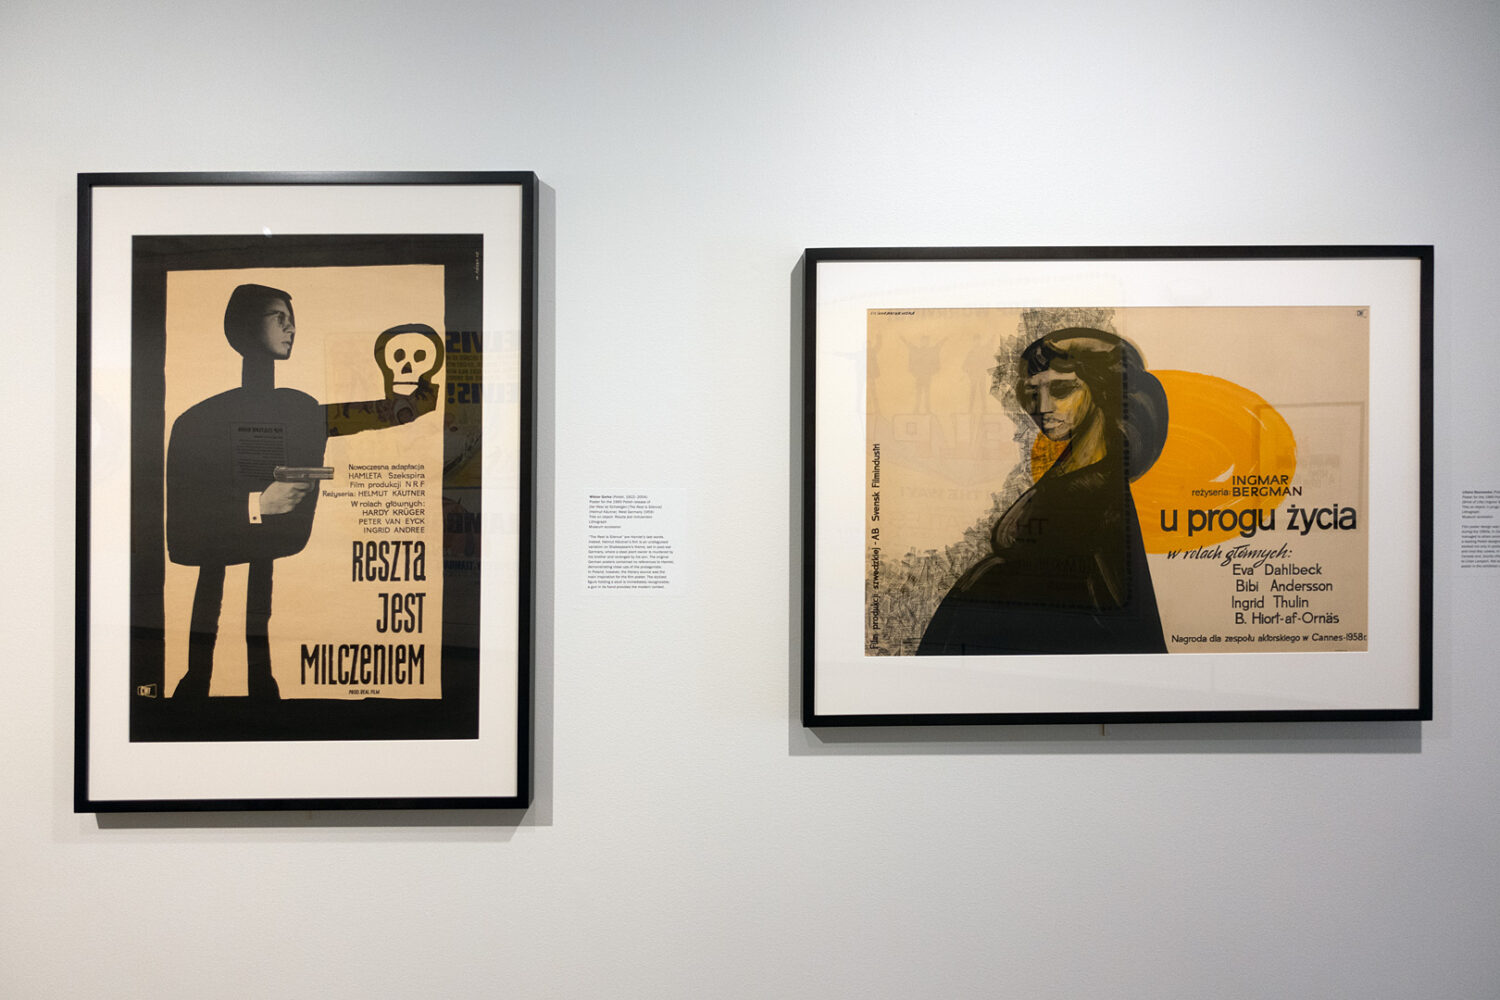 Eastern European posters from "Crashing Into The Sixties: Film Posters From The Collection" at George Eastman Museum